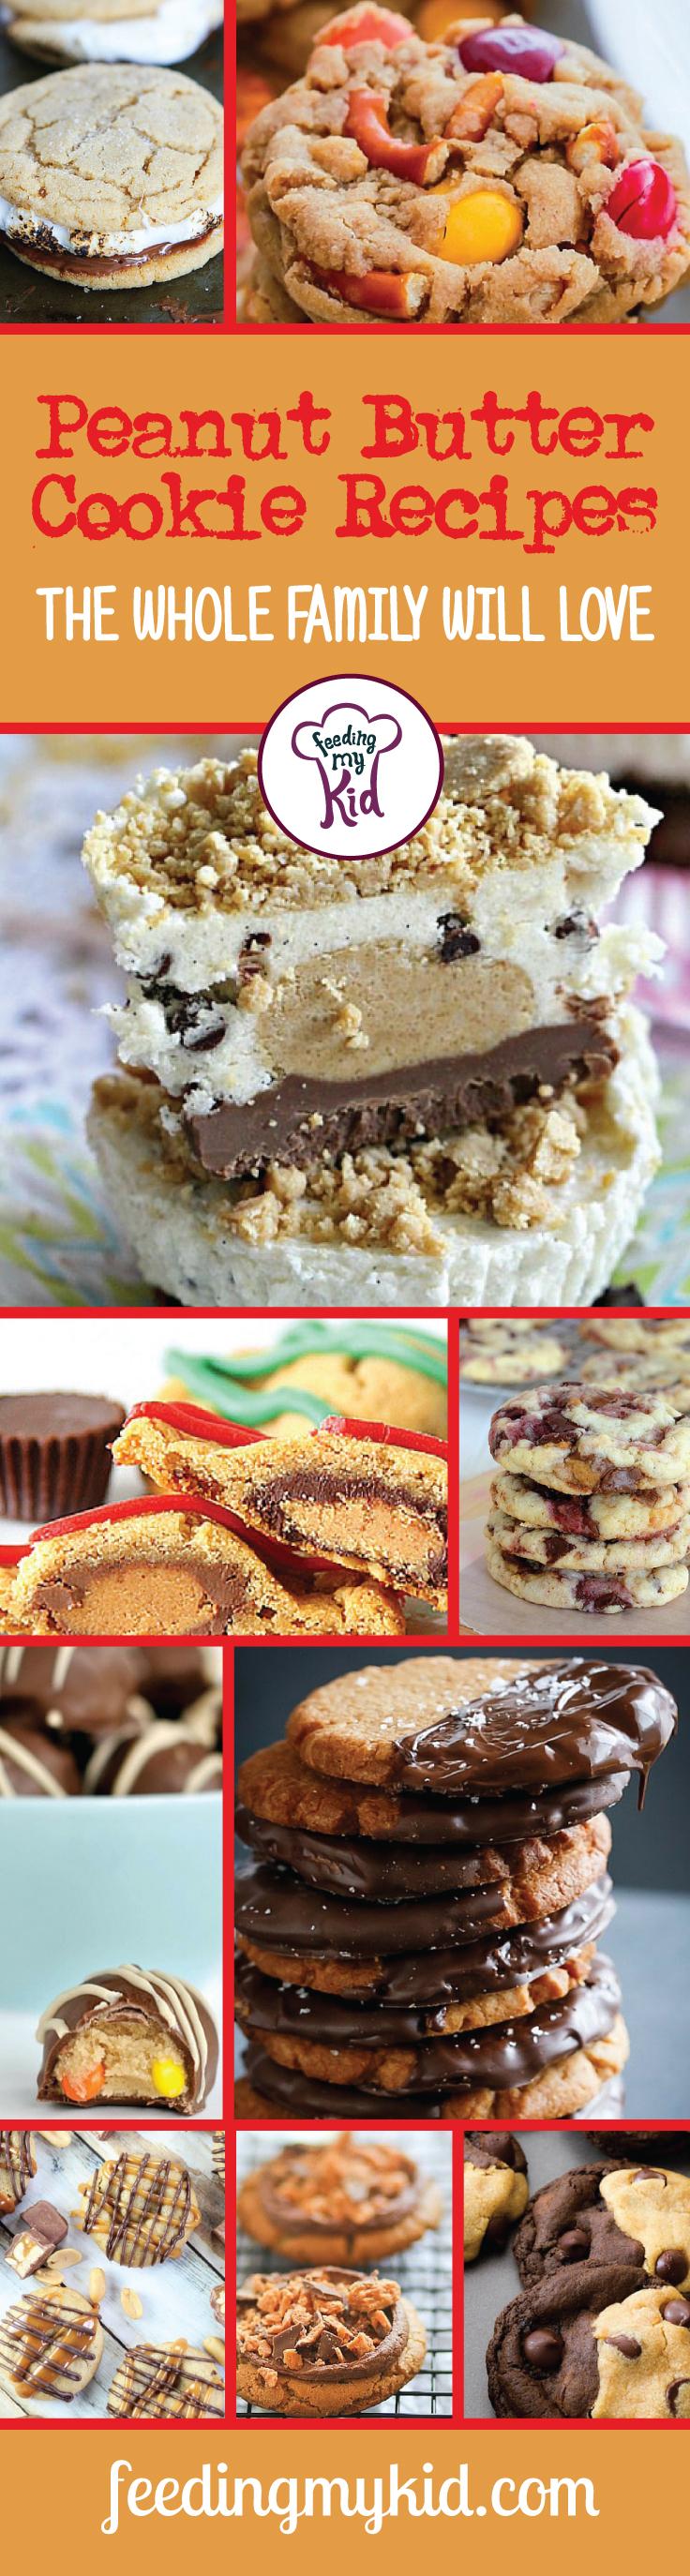 Peanut Butter Cookie Recipes the Whole Family Will Love - Peanut butter is a versatile food that is good in just about anything. You can put it on a sandwich, in a smoothie or on a celery stick. Peanut butter is a great food that if served right, is a healthy food option that tastes amazing. We have awesome selection of the perfect peanut butter cookie recipes just for you! From chocolate chip peanut butter oatmeal cookies to snickers stuffed peanut butter cookies. These great peanut butter recipes are perfect for the whole family! This is a must share and must pin! #fmk #recipes #cookies 